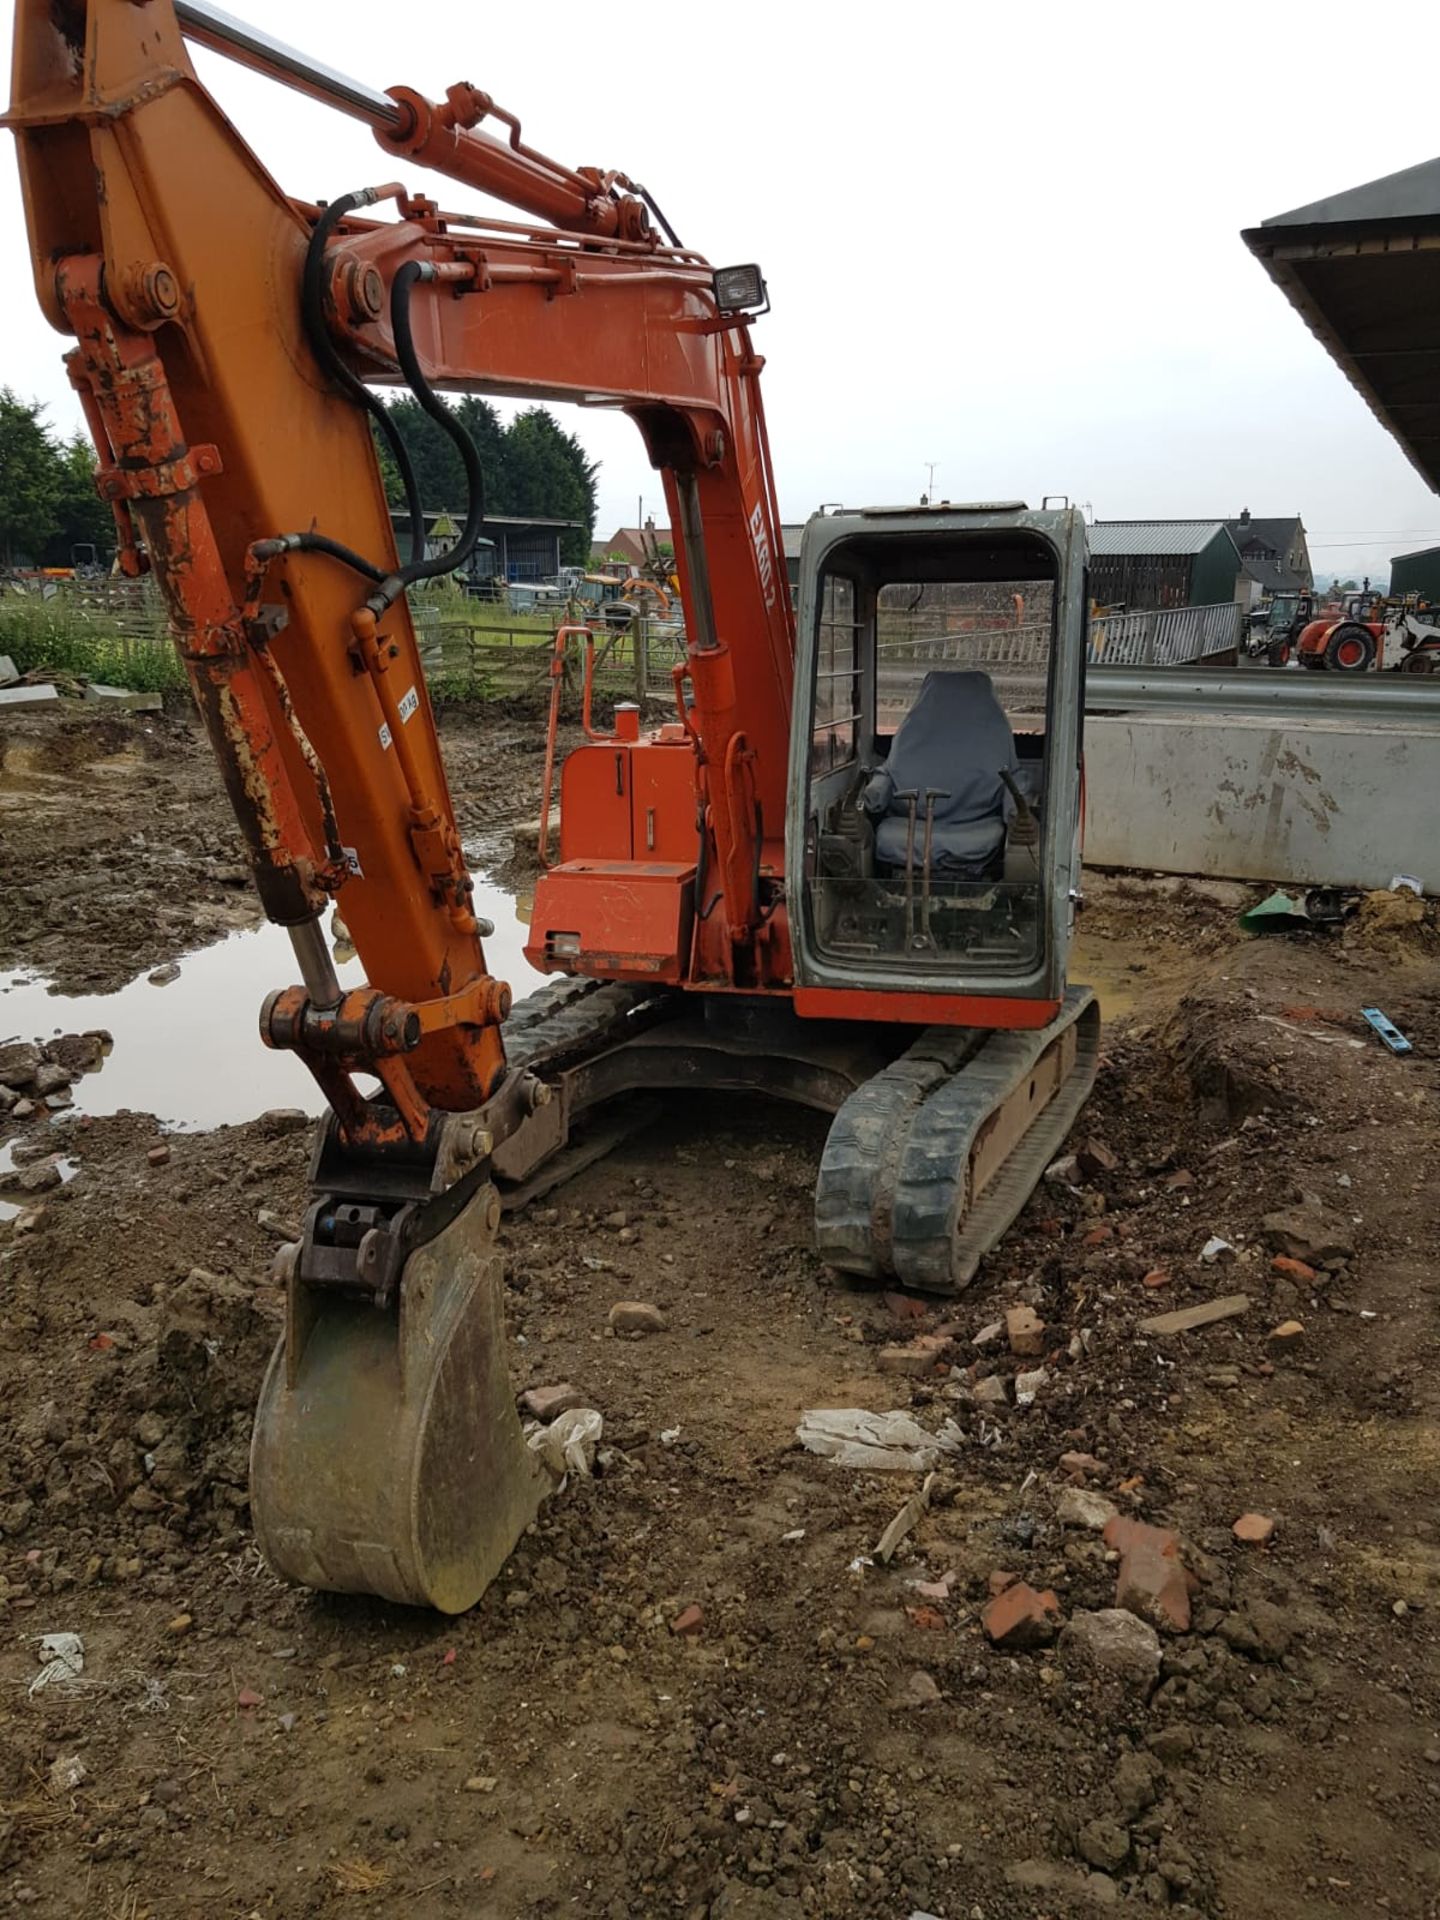 HITATCHI EX 60.2 TRACKED DIGGER / EXCAVATOR, STARTS, DRIVES AND DIGS *PLUS VAT* - Image 3 of 6